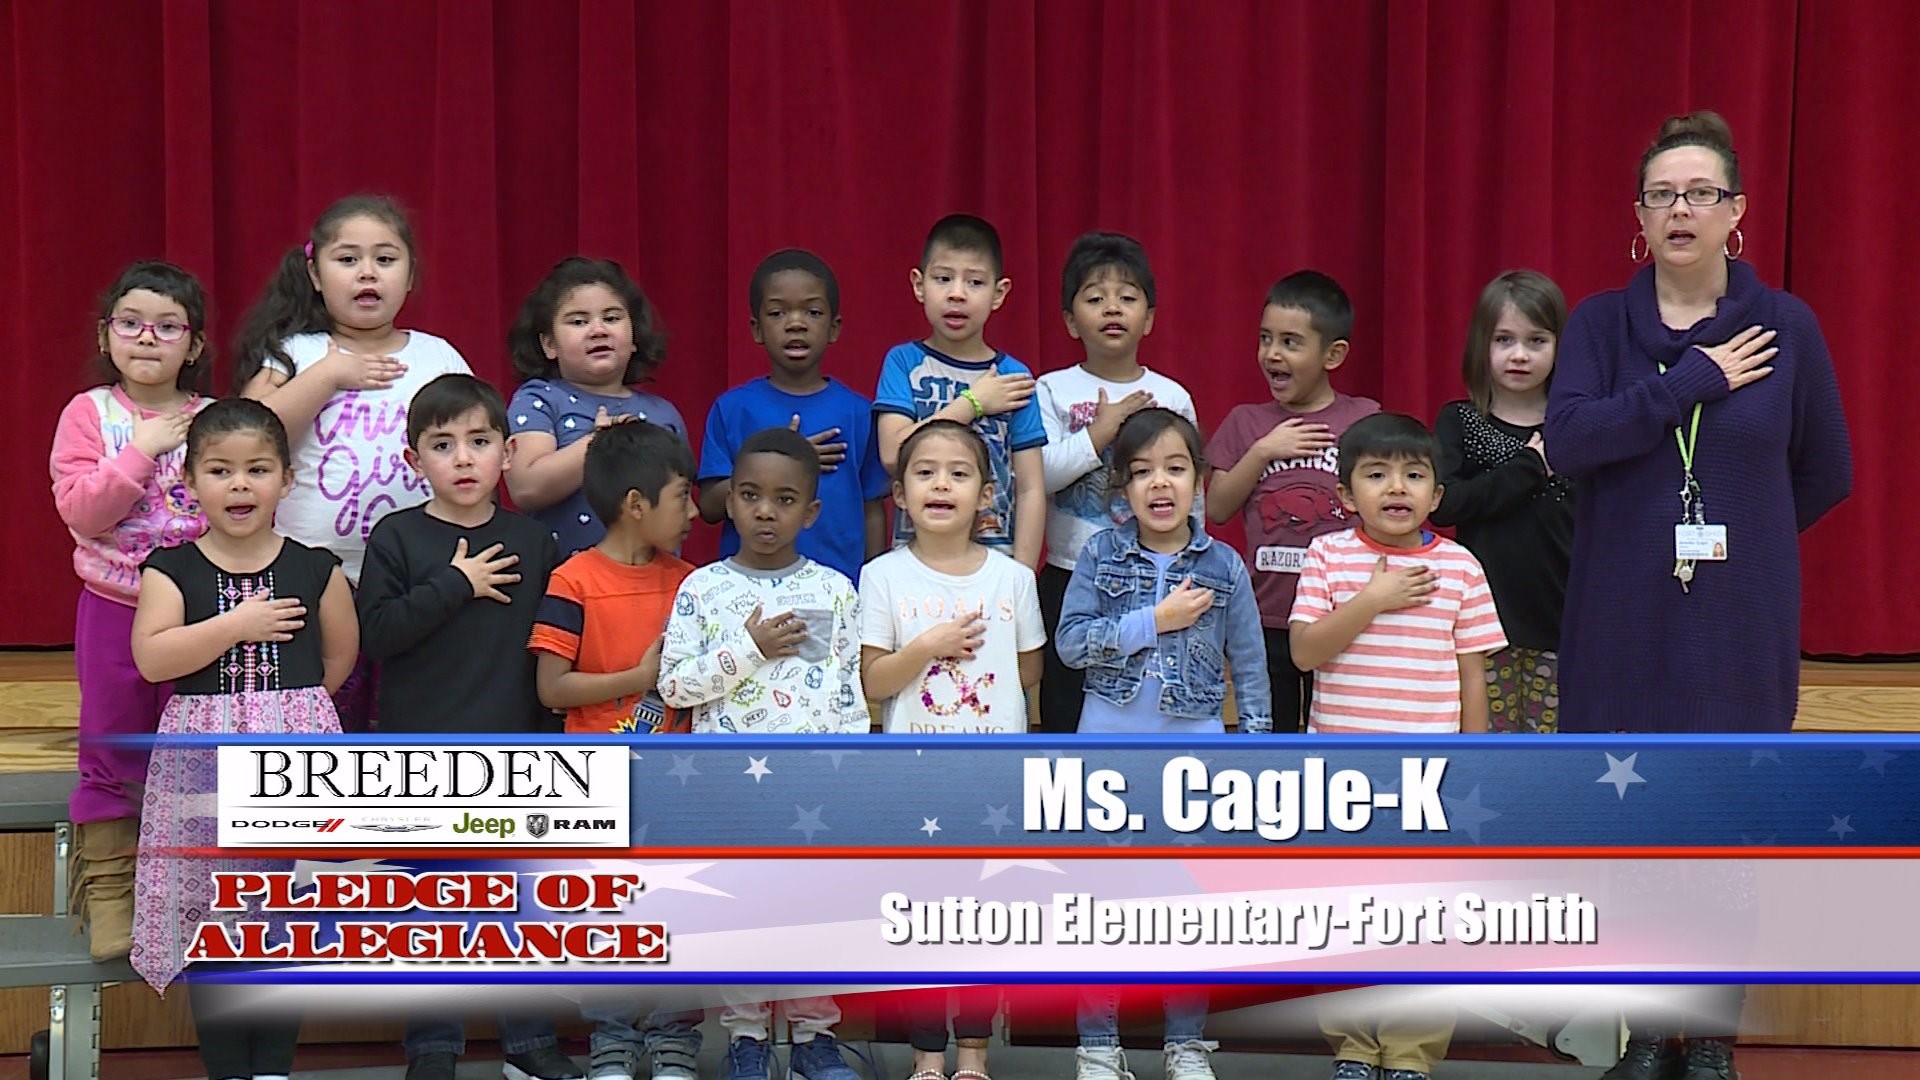 Mrs. Cagle  K  Sutton Elementary  Fort Smith